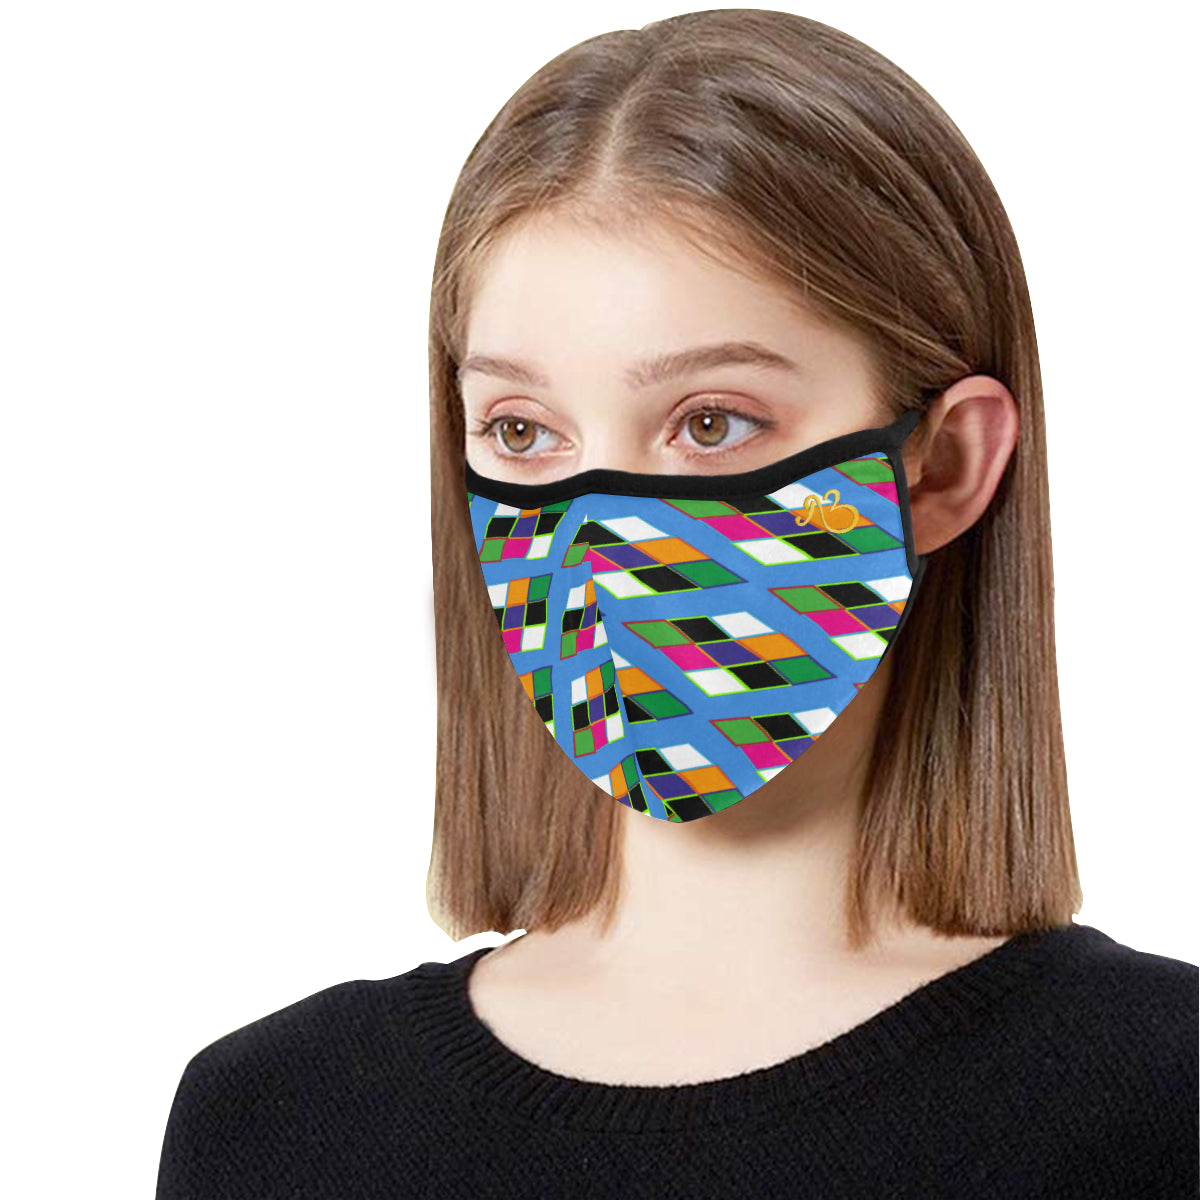 Pyramid Print Cotton Fabric Face Mask with filter slot (30 Filters Included) - Non-medical use